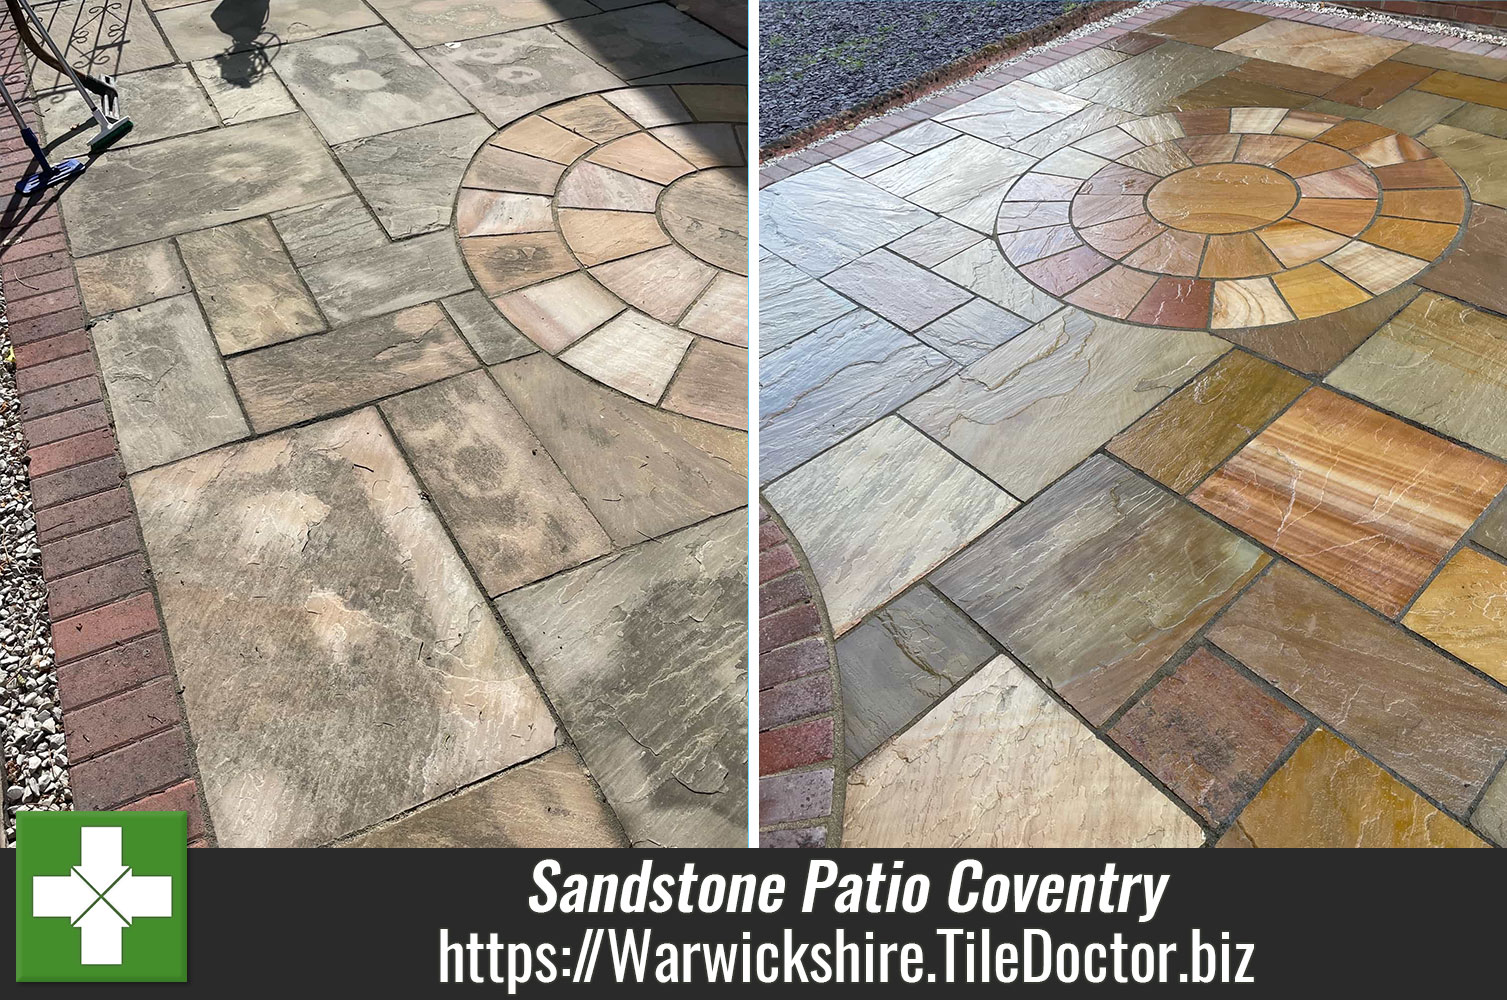 Deep Cleaning a Sandstone Patio with Tile Doctor Pro-Clean in Warwickshire